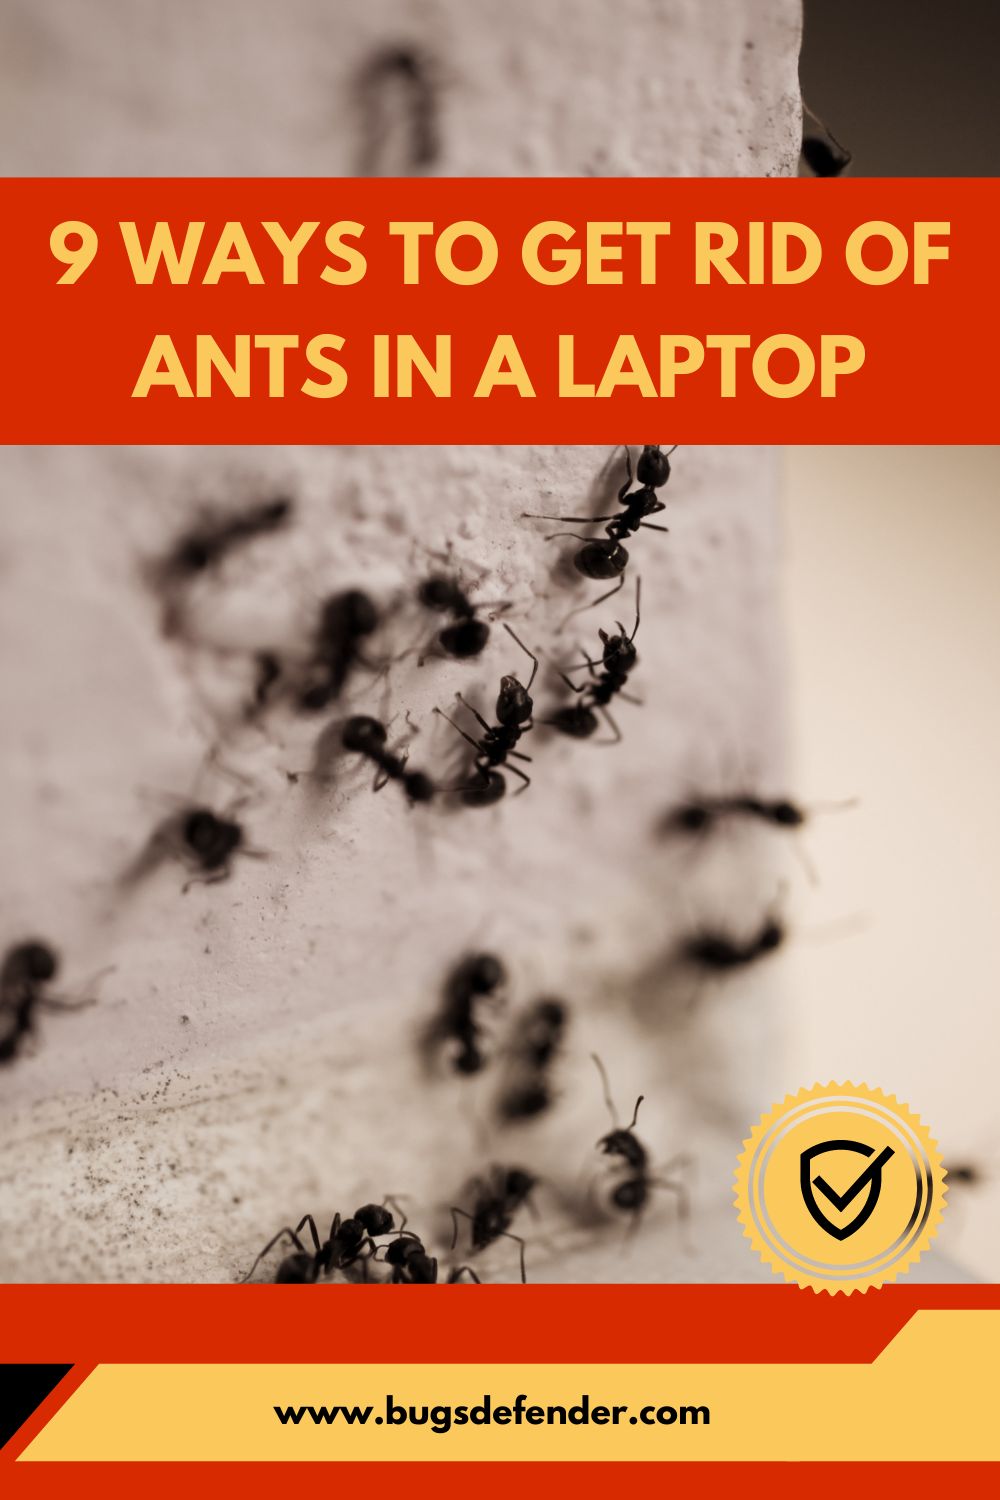 9 Ways to Get Rid of Ants in a Laptop pin1